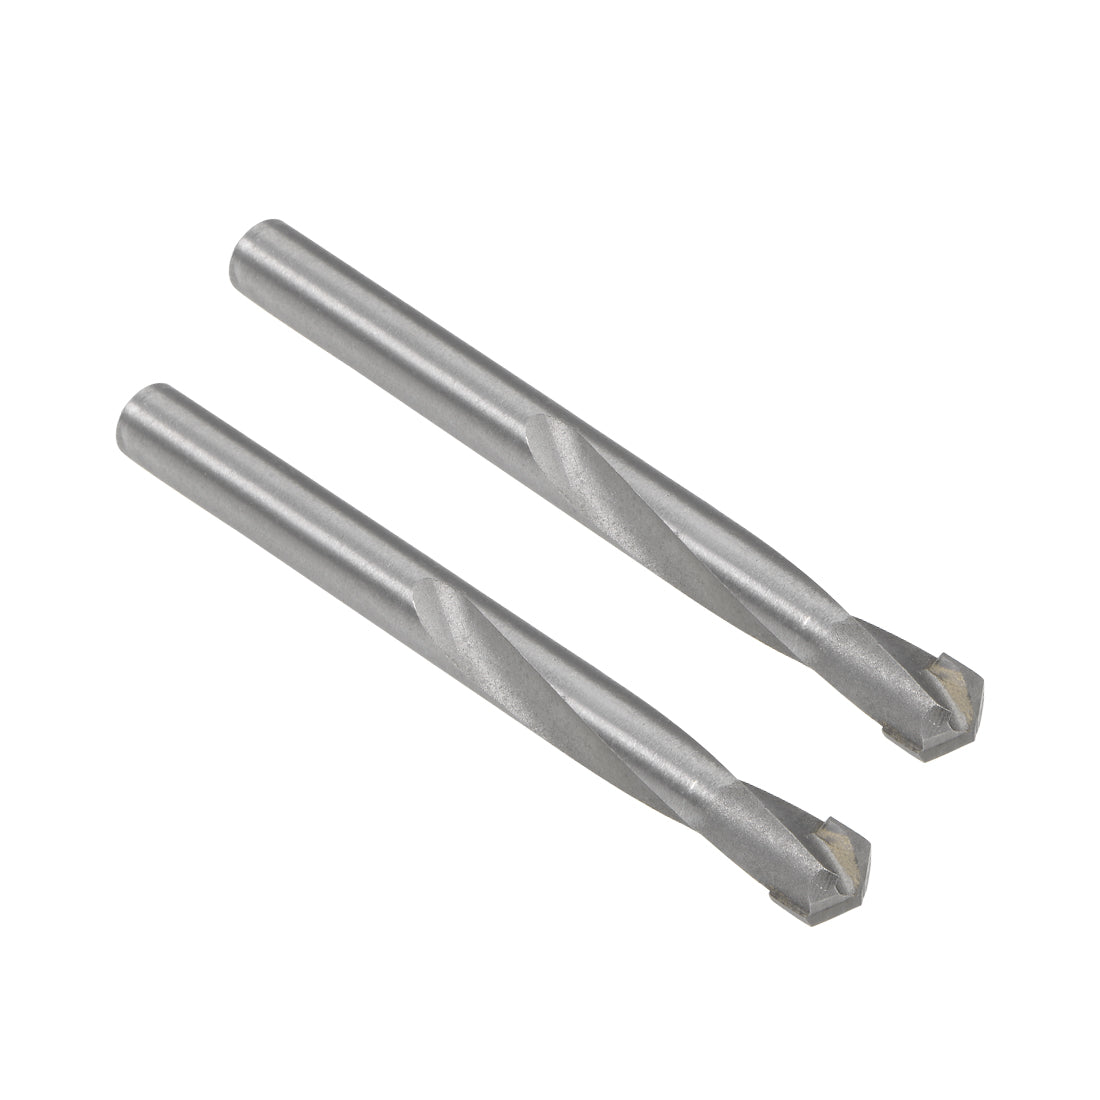 uxcell Uxcell 10mm Cemented Carbide Twist Drill Bits for Stainless Steel Copper Aluminum 2 Pcs